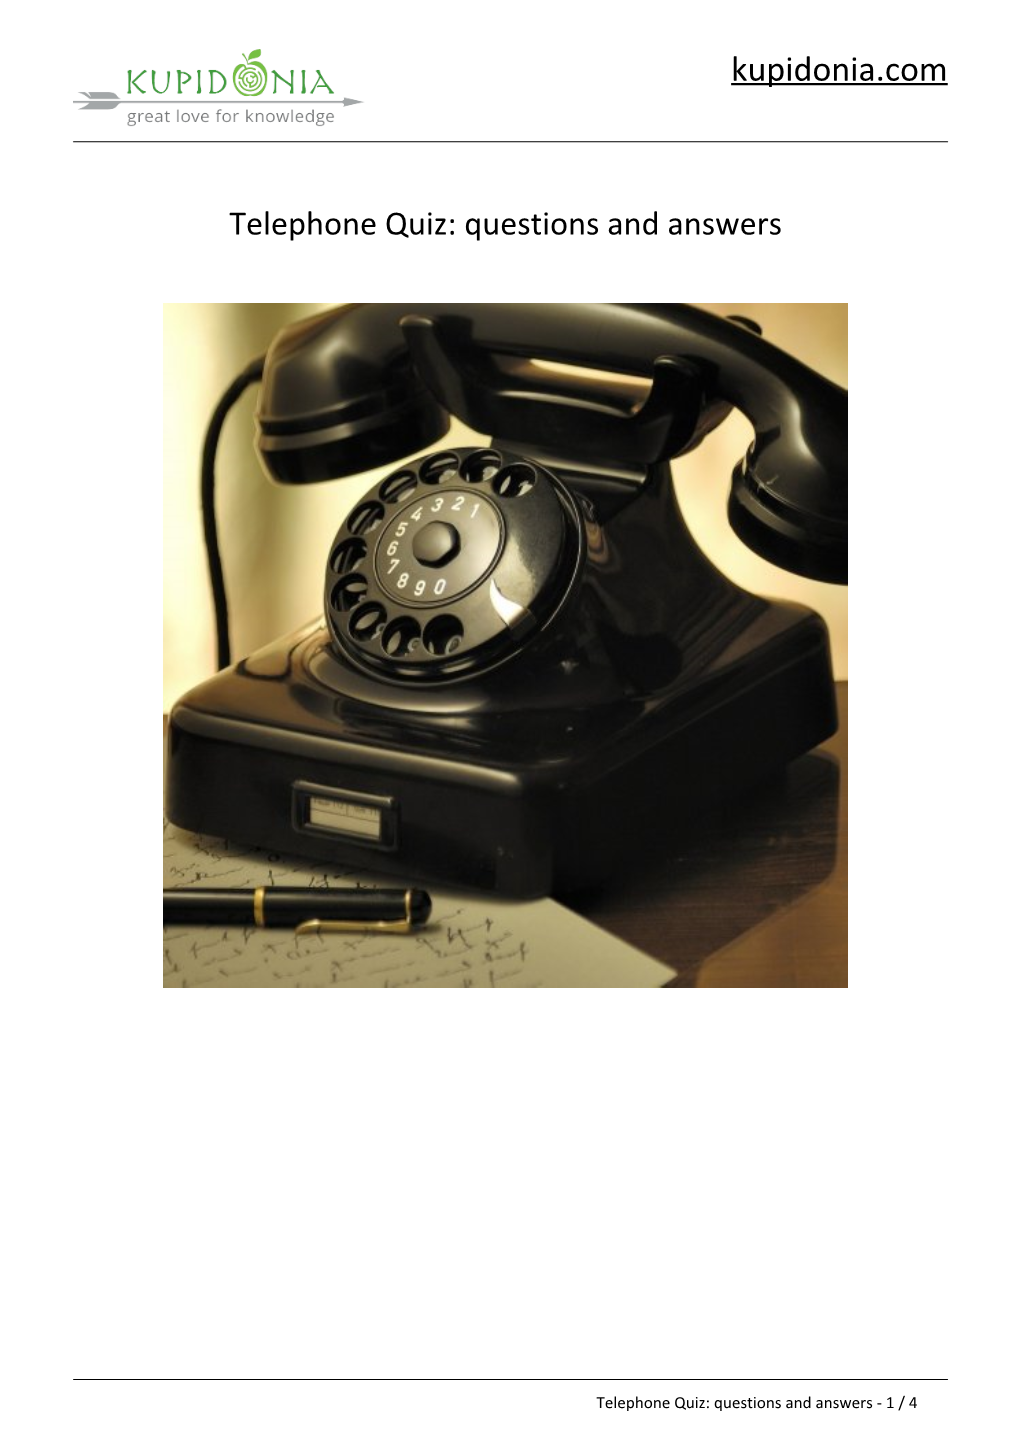 Telephone Quiz: Questions and Answers